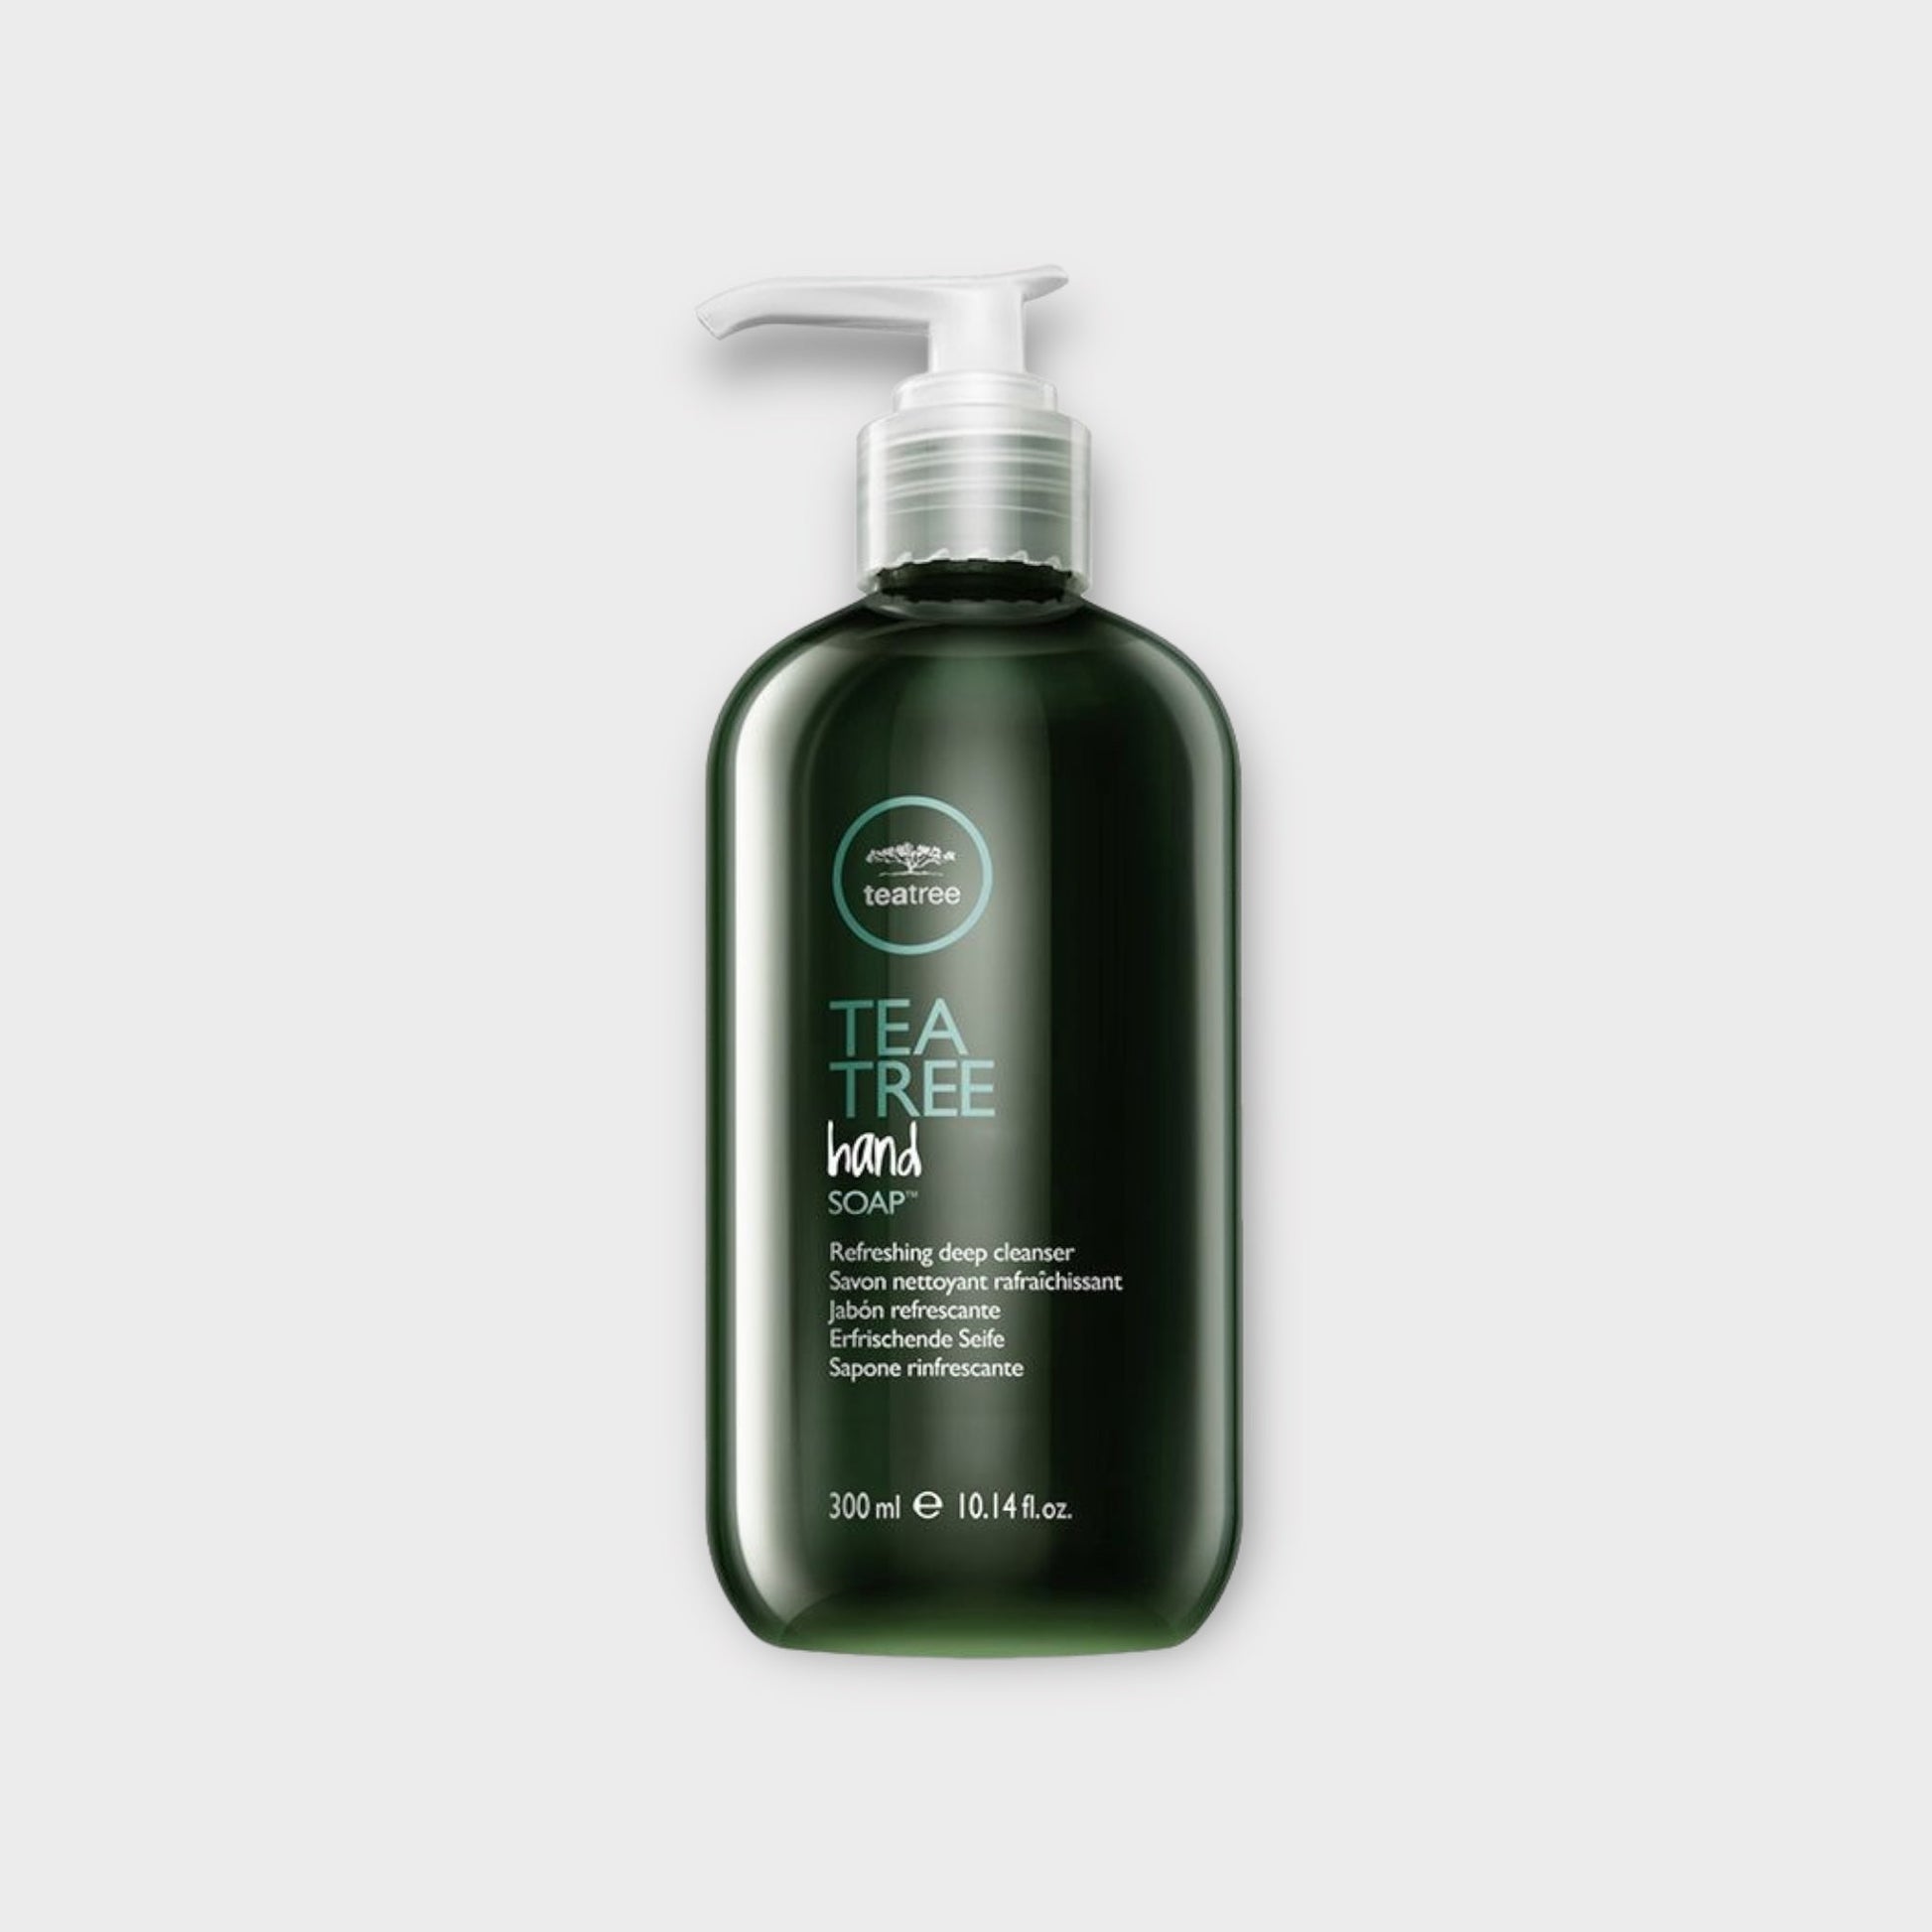 Tea Tree Hand Soap - 300ml - Wash it Out